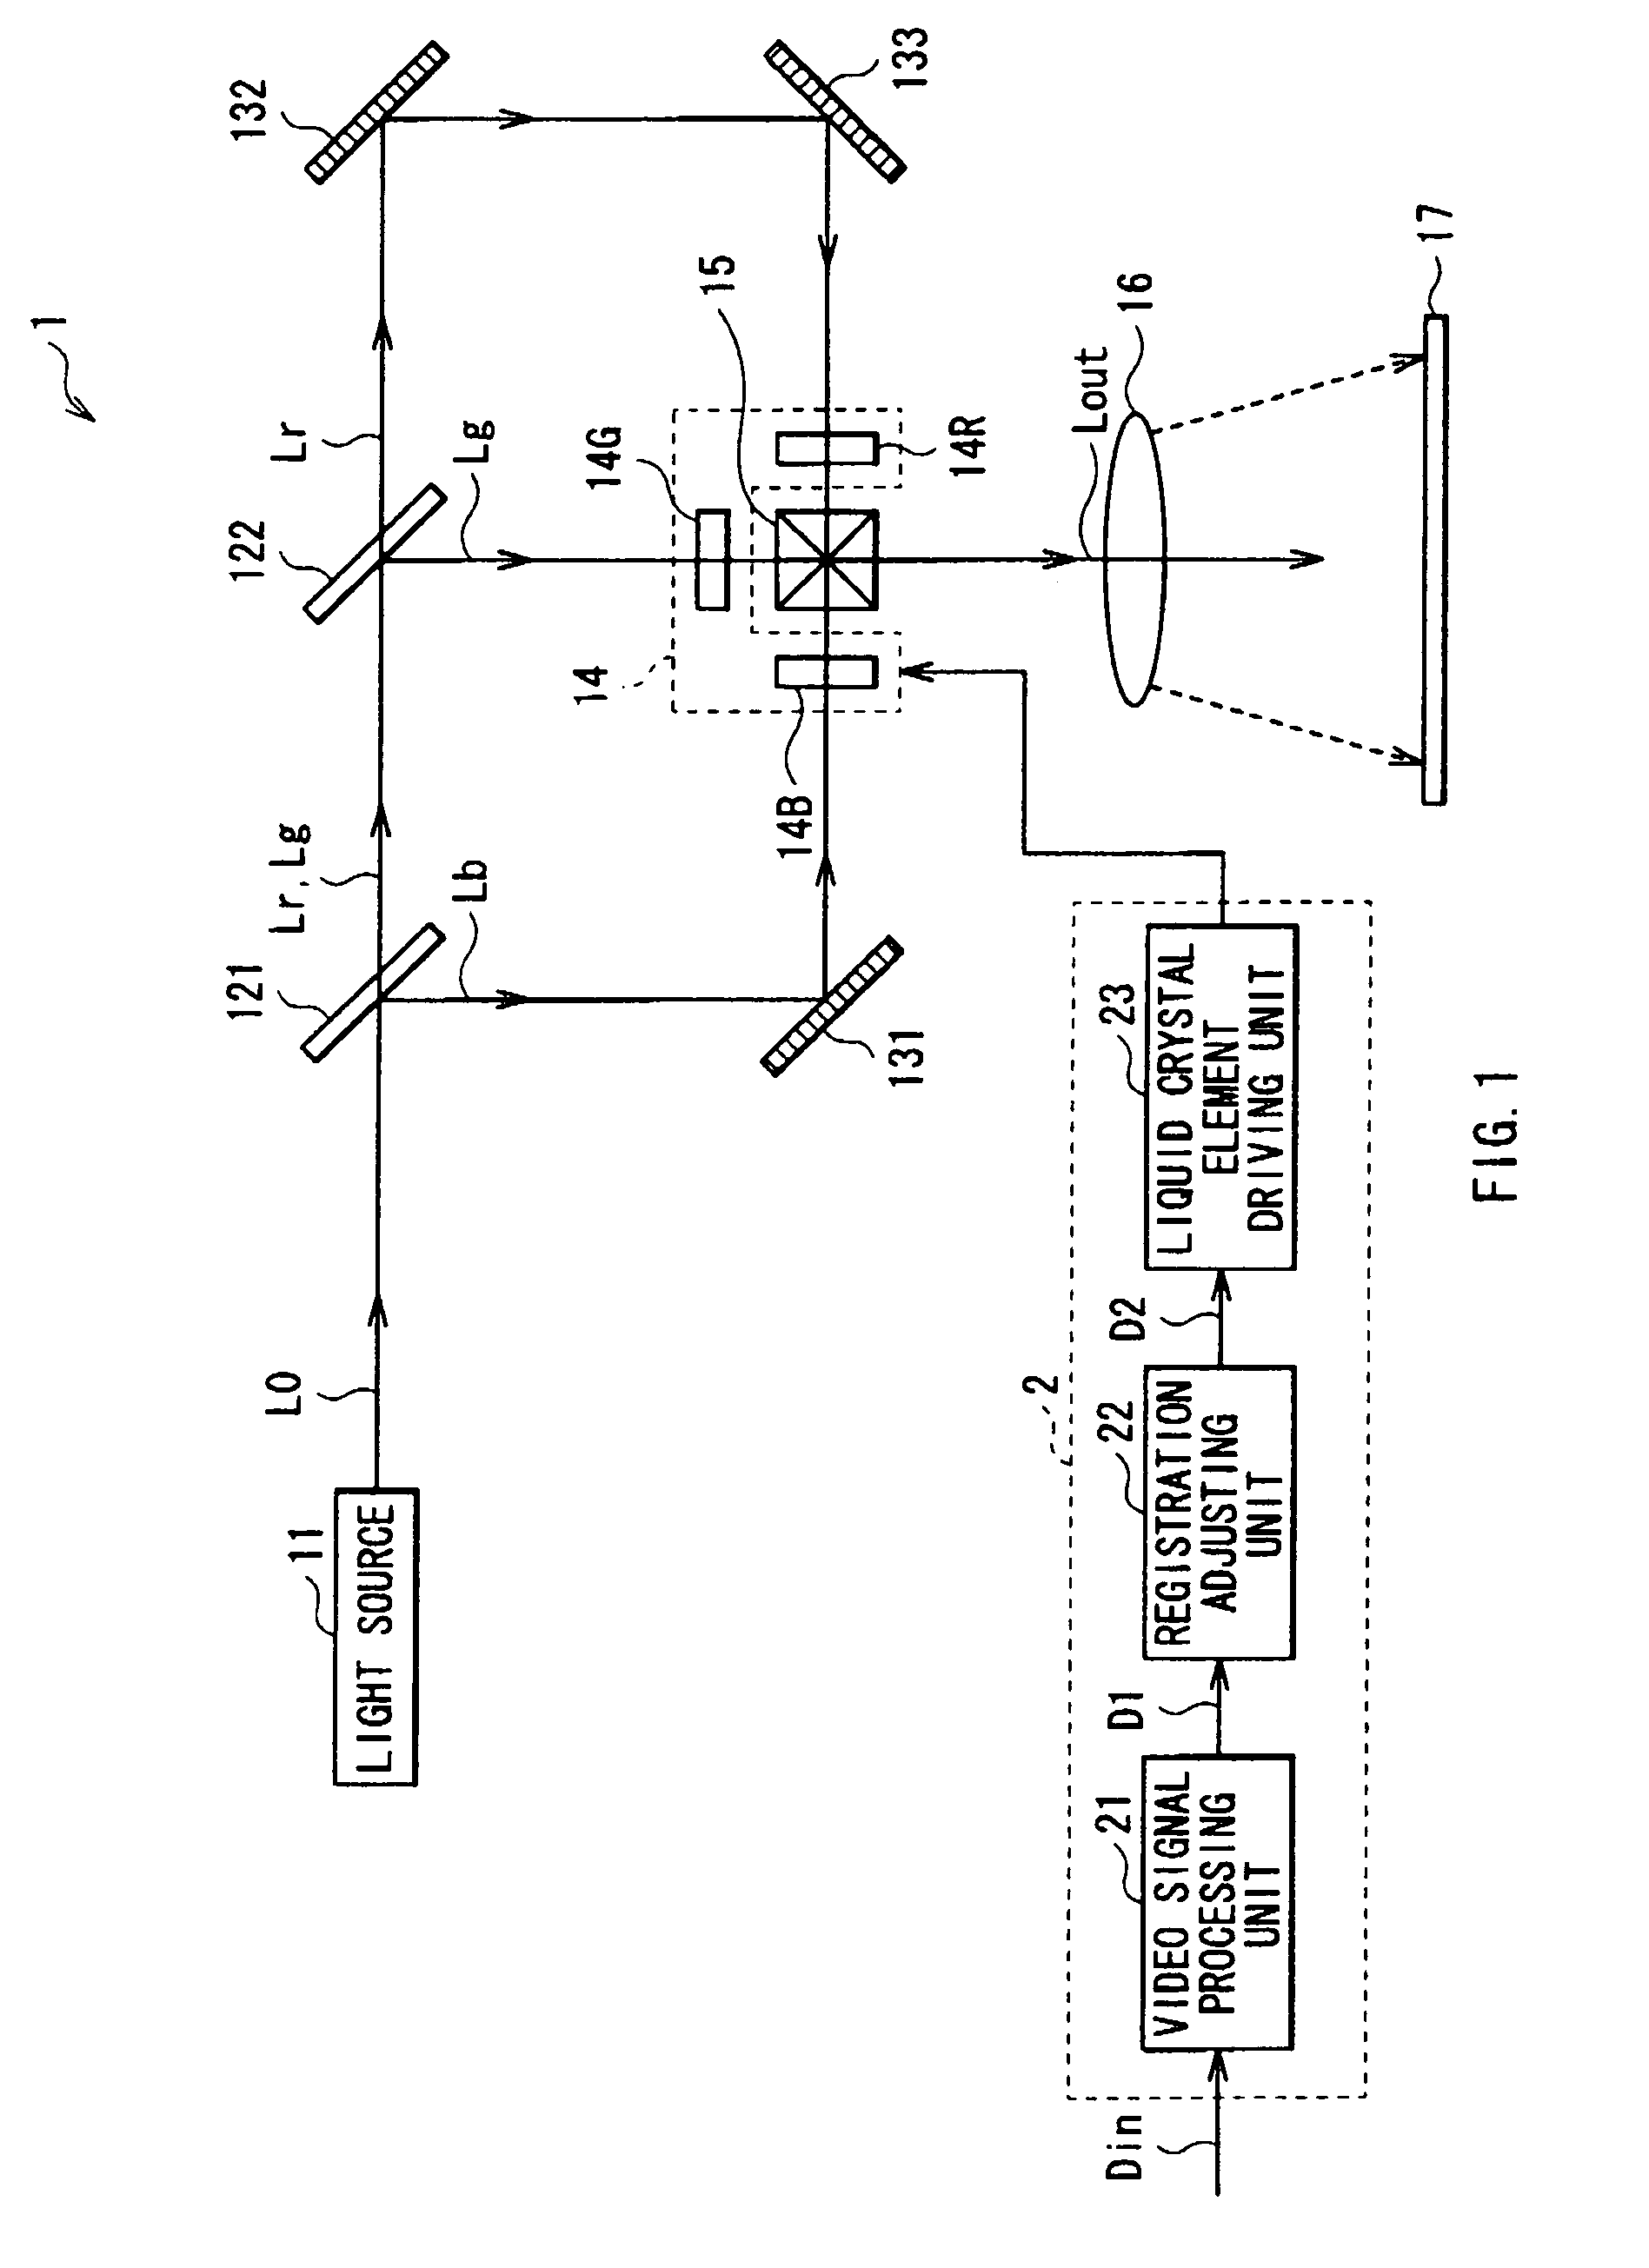 Projection display apparatus which enables misregistration between primary color lights projected on a screen to be reduced